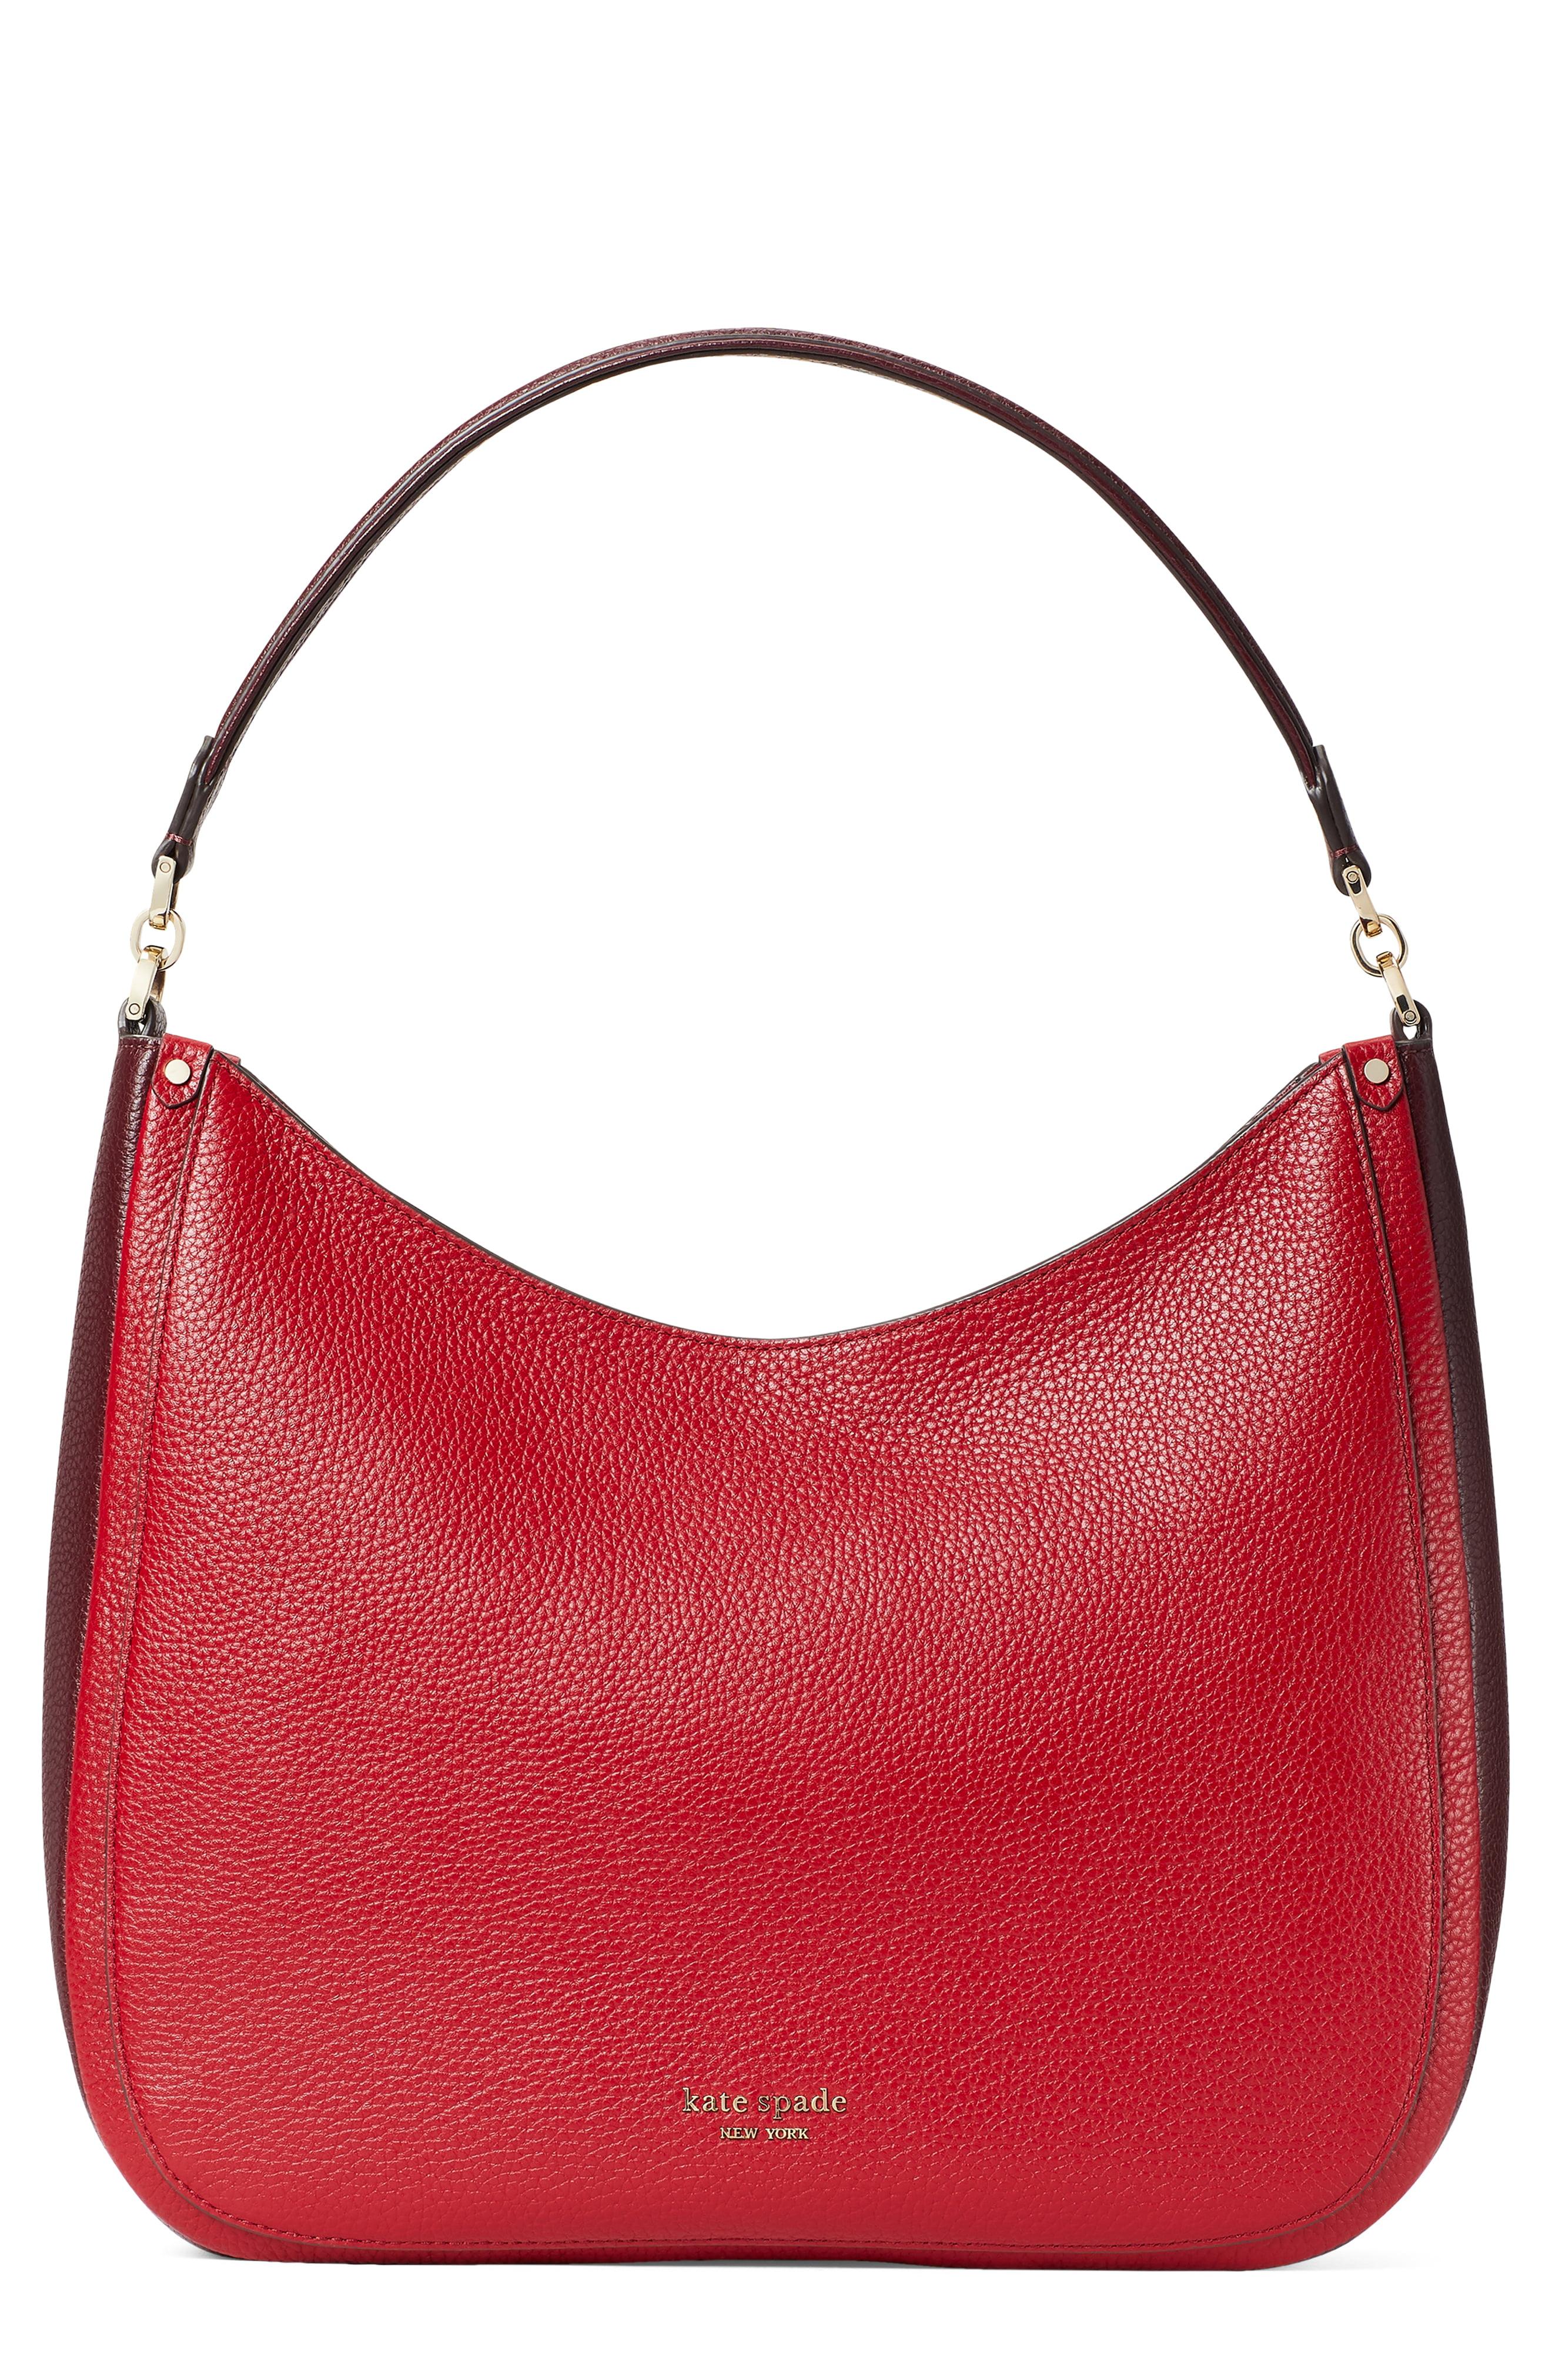 Kate Spade Roulette Large Leather Hobo Bag in Red - Lyst